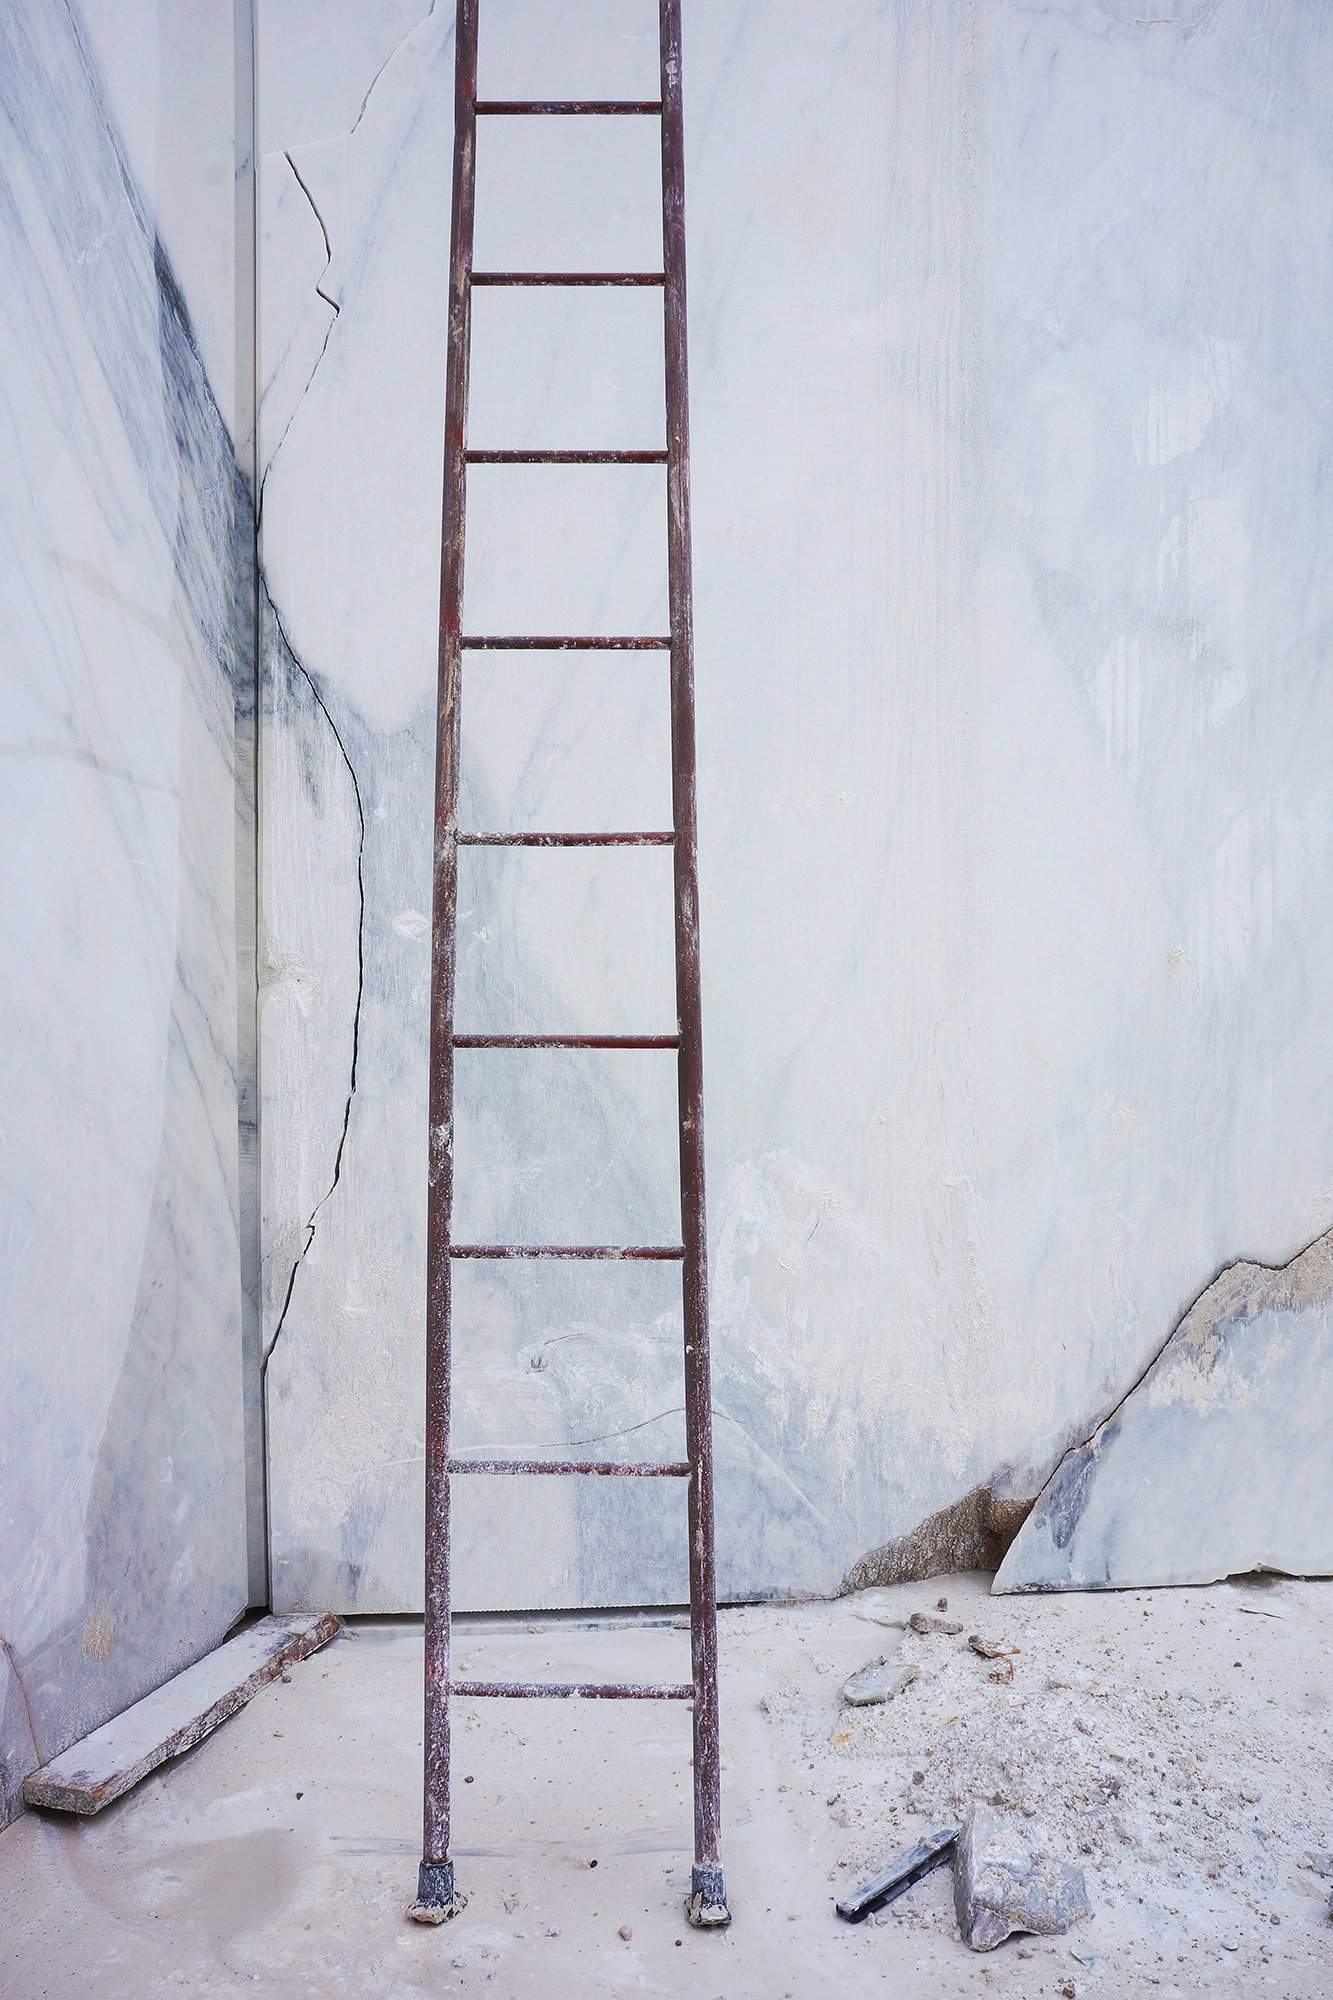 A ladder in front of cracked marble walls.